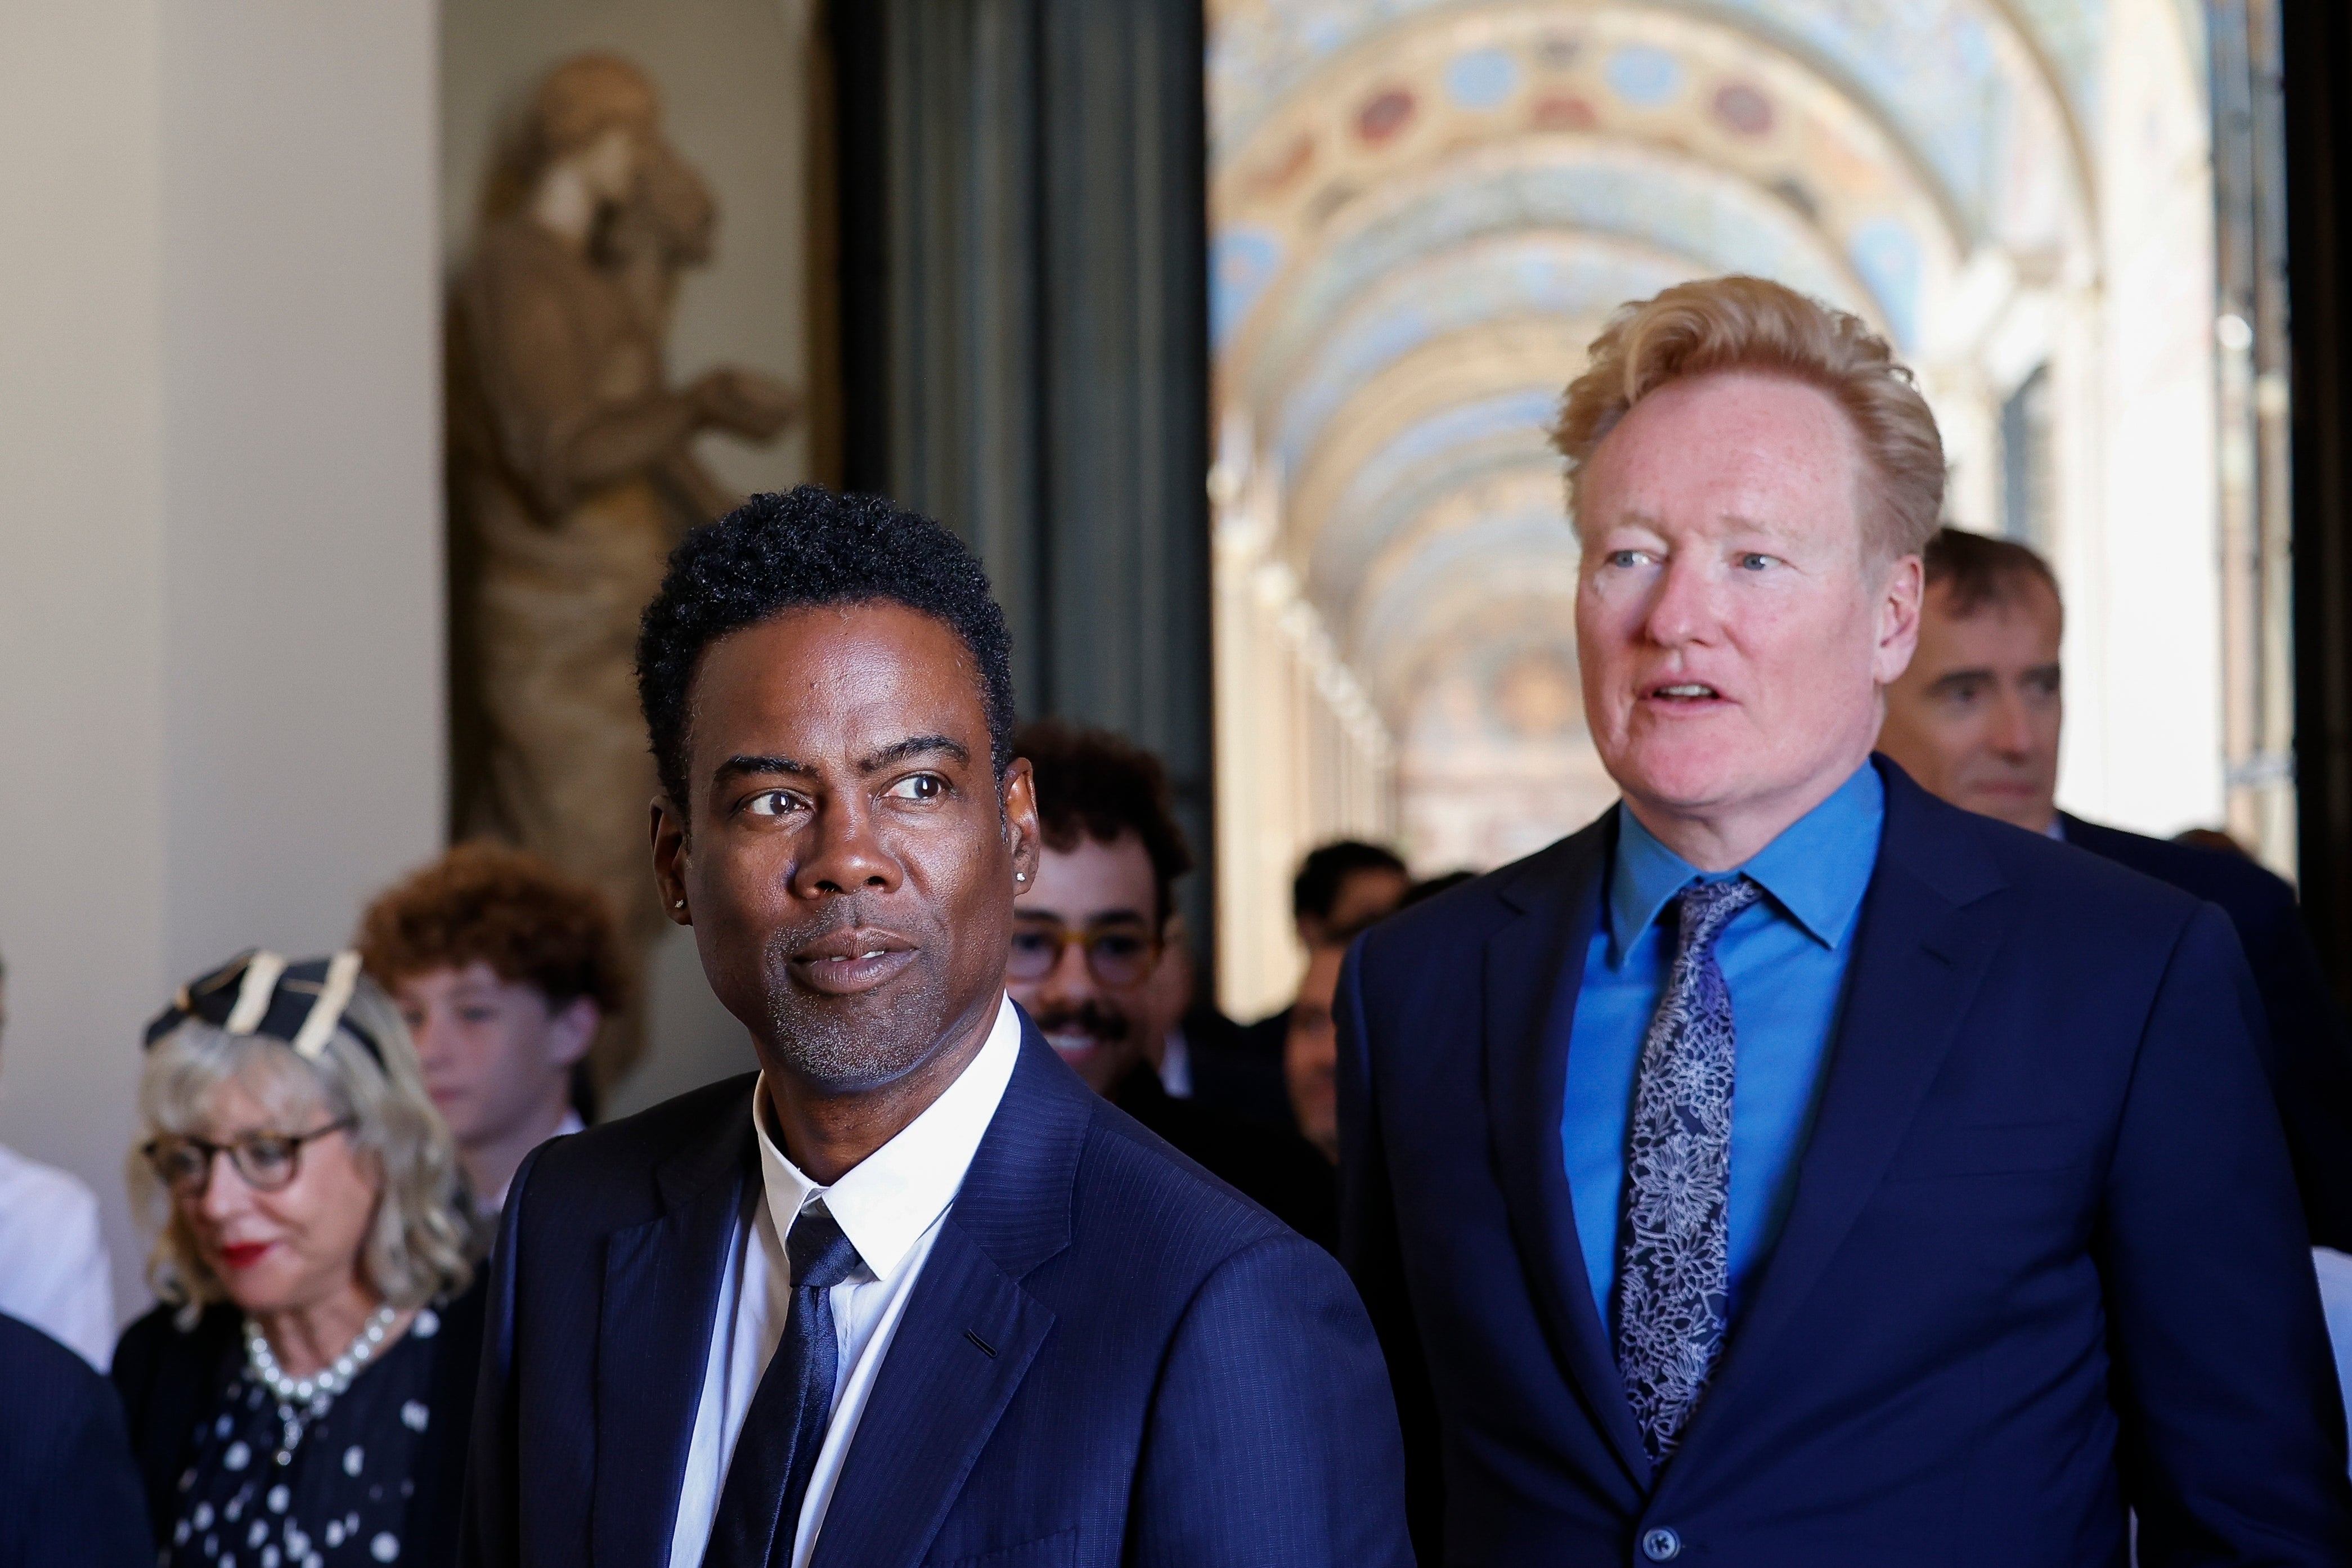 Chris Rock, left, and Conan O’Brien arrive for an audience with Pope Francis in the Clementine Hall at The Vatican